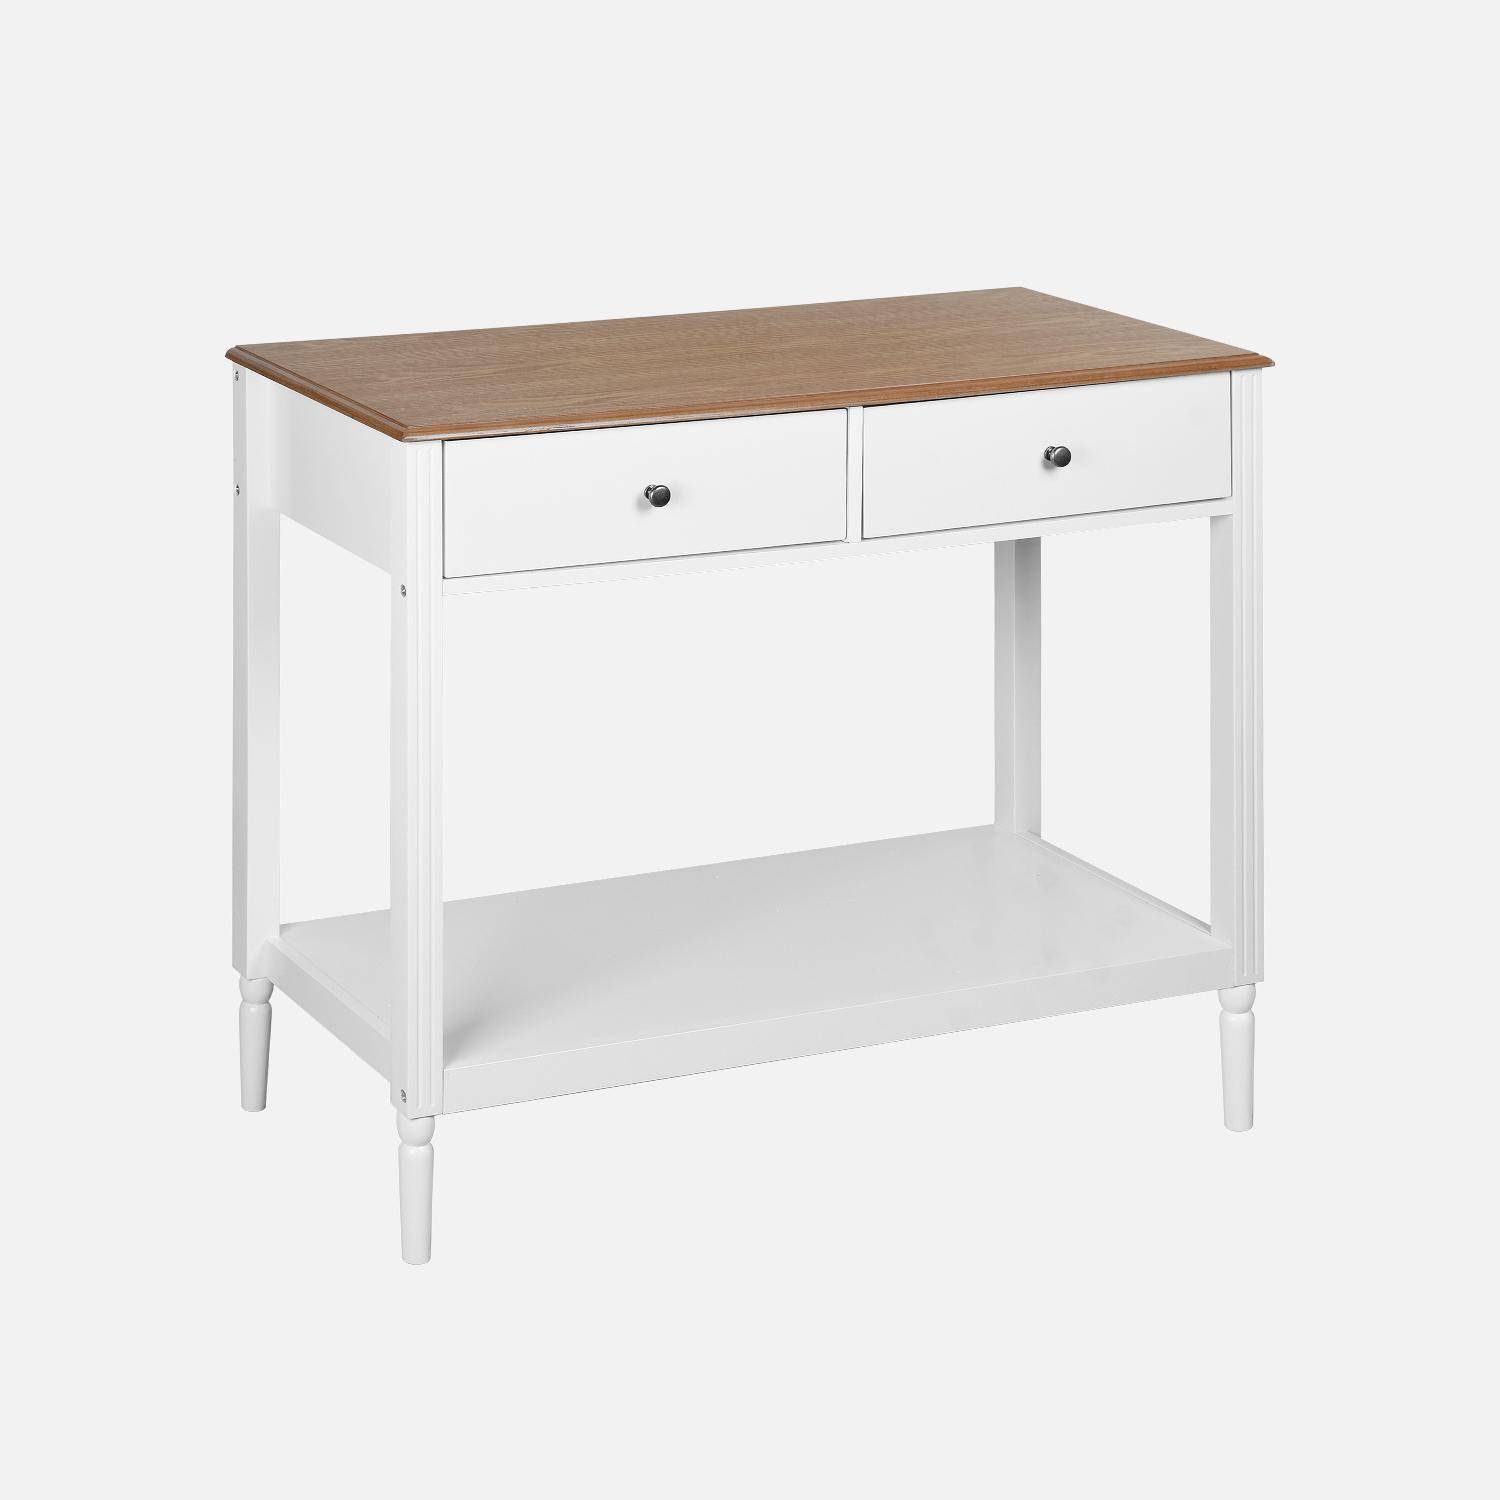 Console table with pinewood legs, 110x40x85cm, Celeste, White,sweeek,Photo3